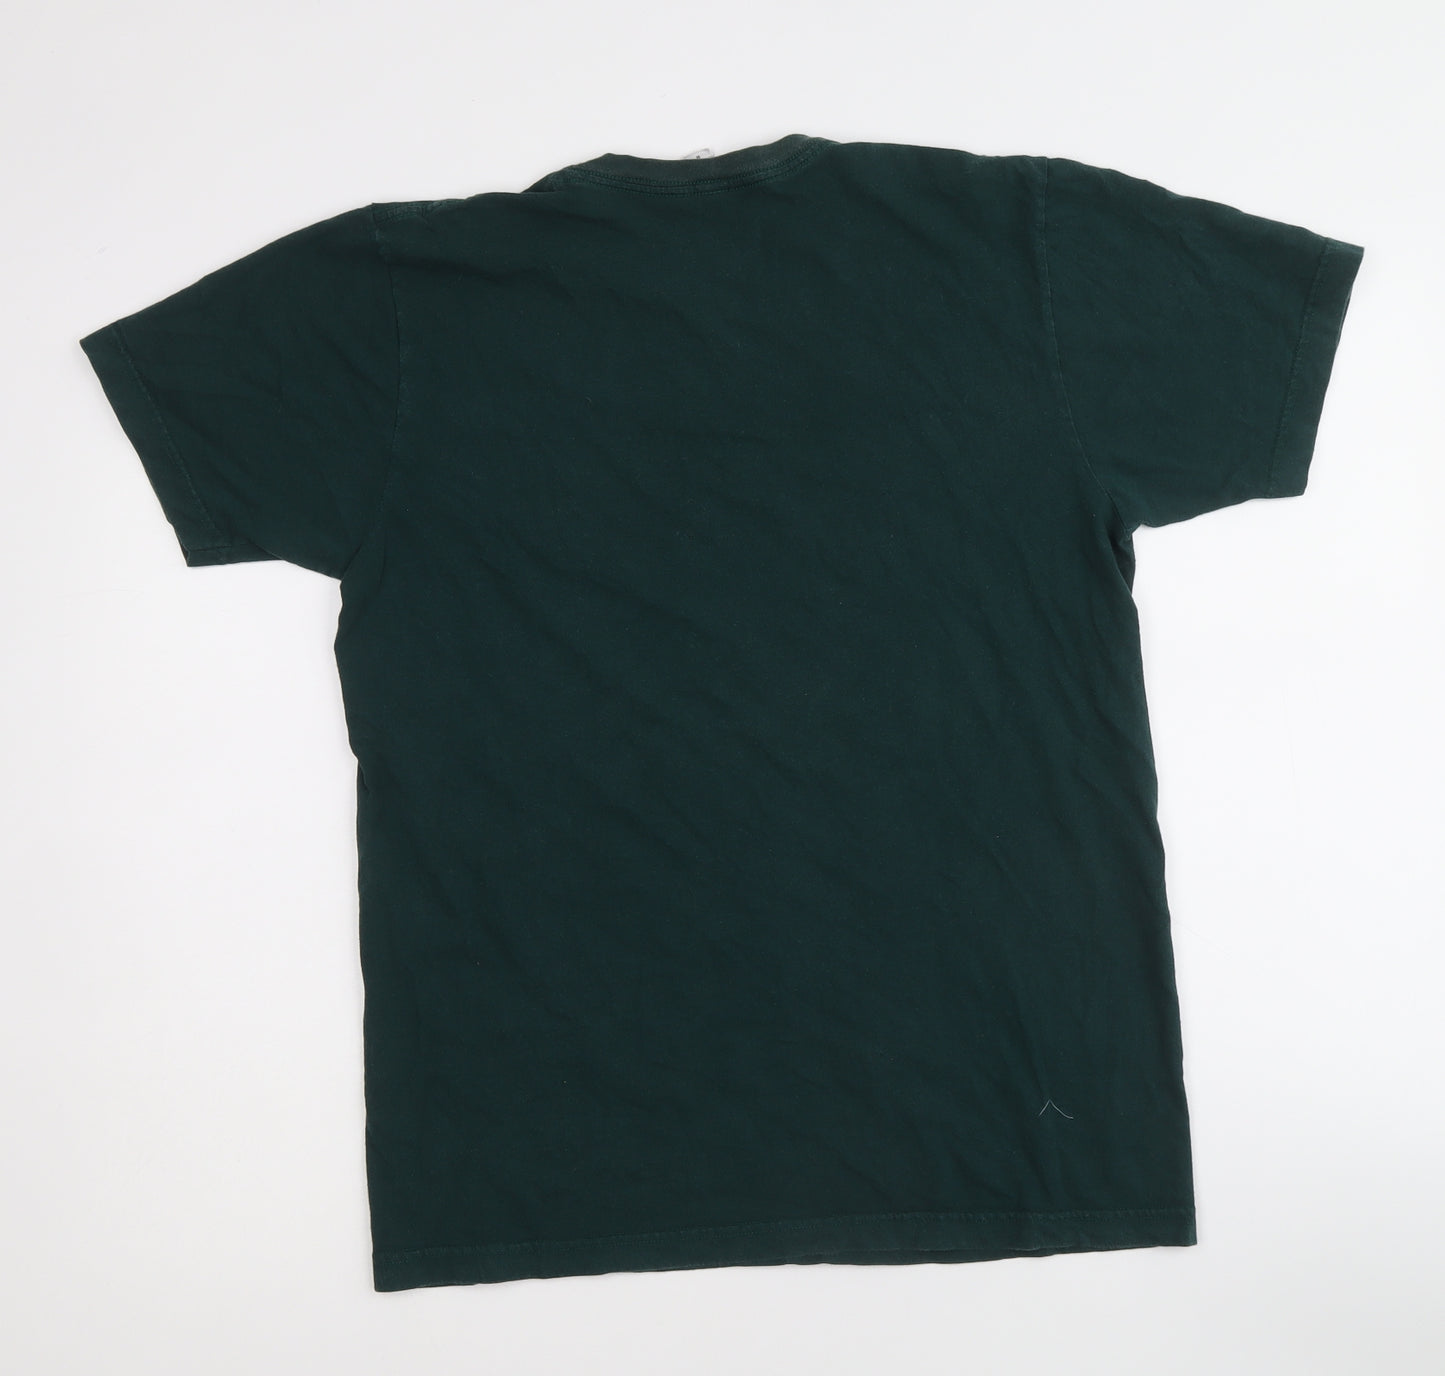 American Apparel Mens Green Cotton Blend T-Shirt Size M Round Neck - Marlow & Sons